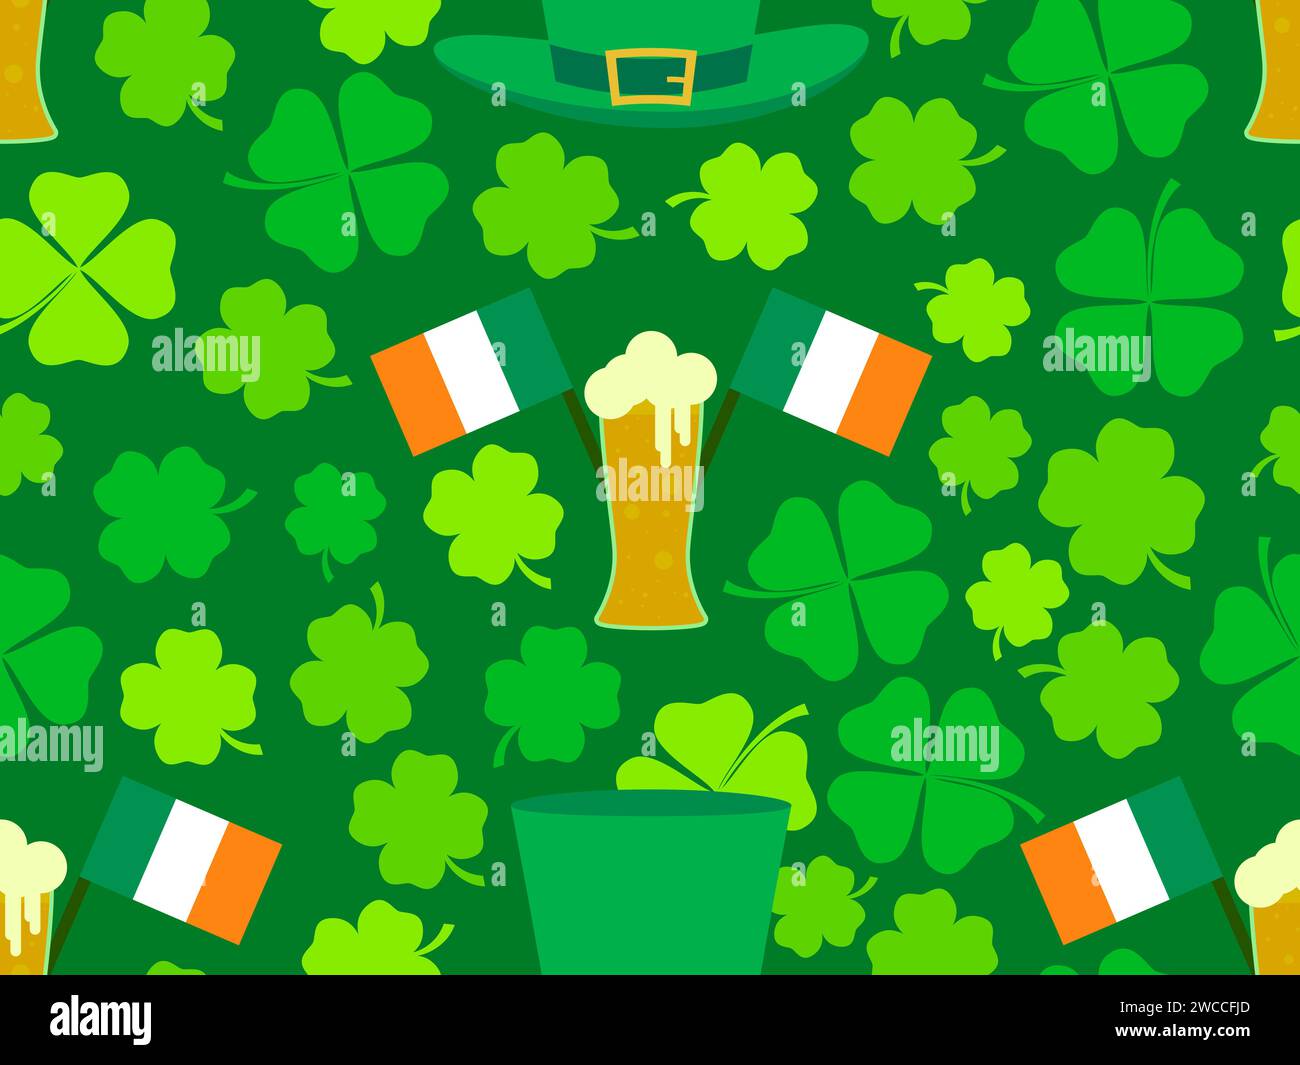 Seamless pattern with Irish flag, clover leaves, leprechaun hat and glasses of beer for St. Patrick's Day. Symbols of the Irish holiday. Festive wallp Stock Vector